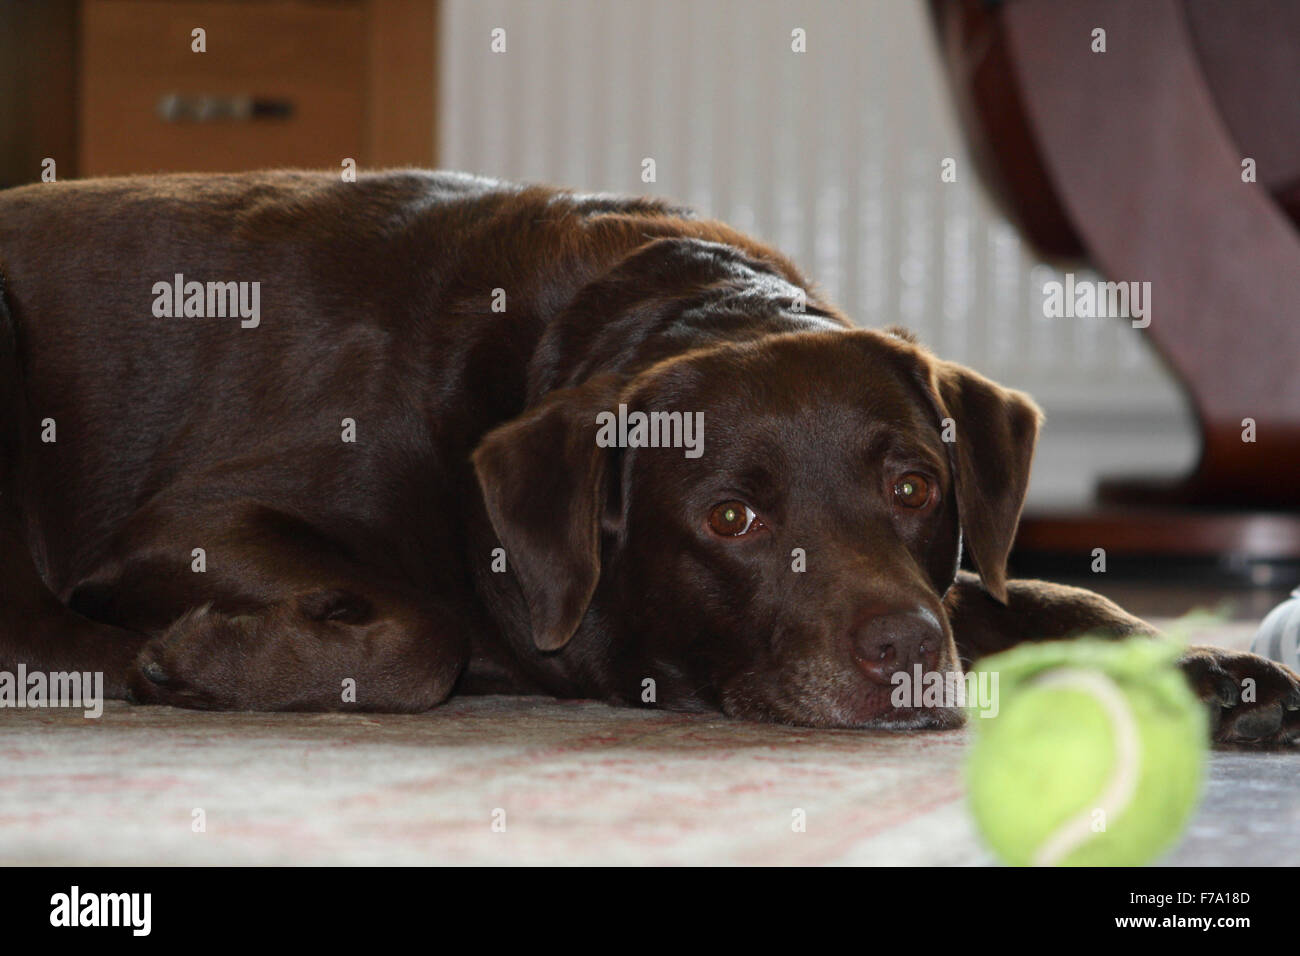 Brown/red/chocolate labrador retriever dog laid down in room looking at camera with his tennis ball in foreground Stock Photo